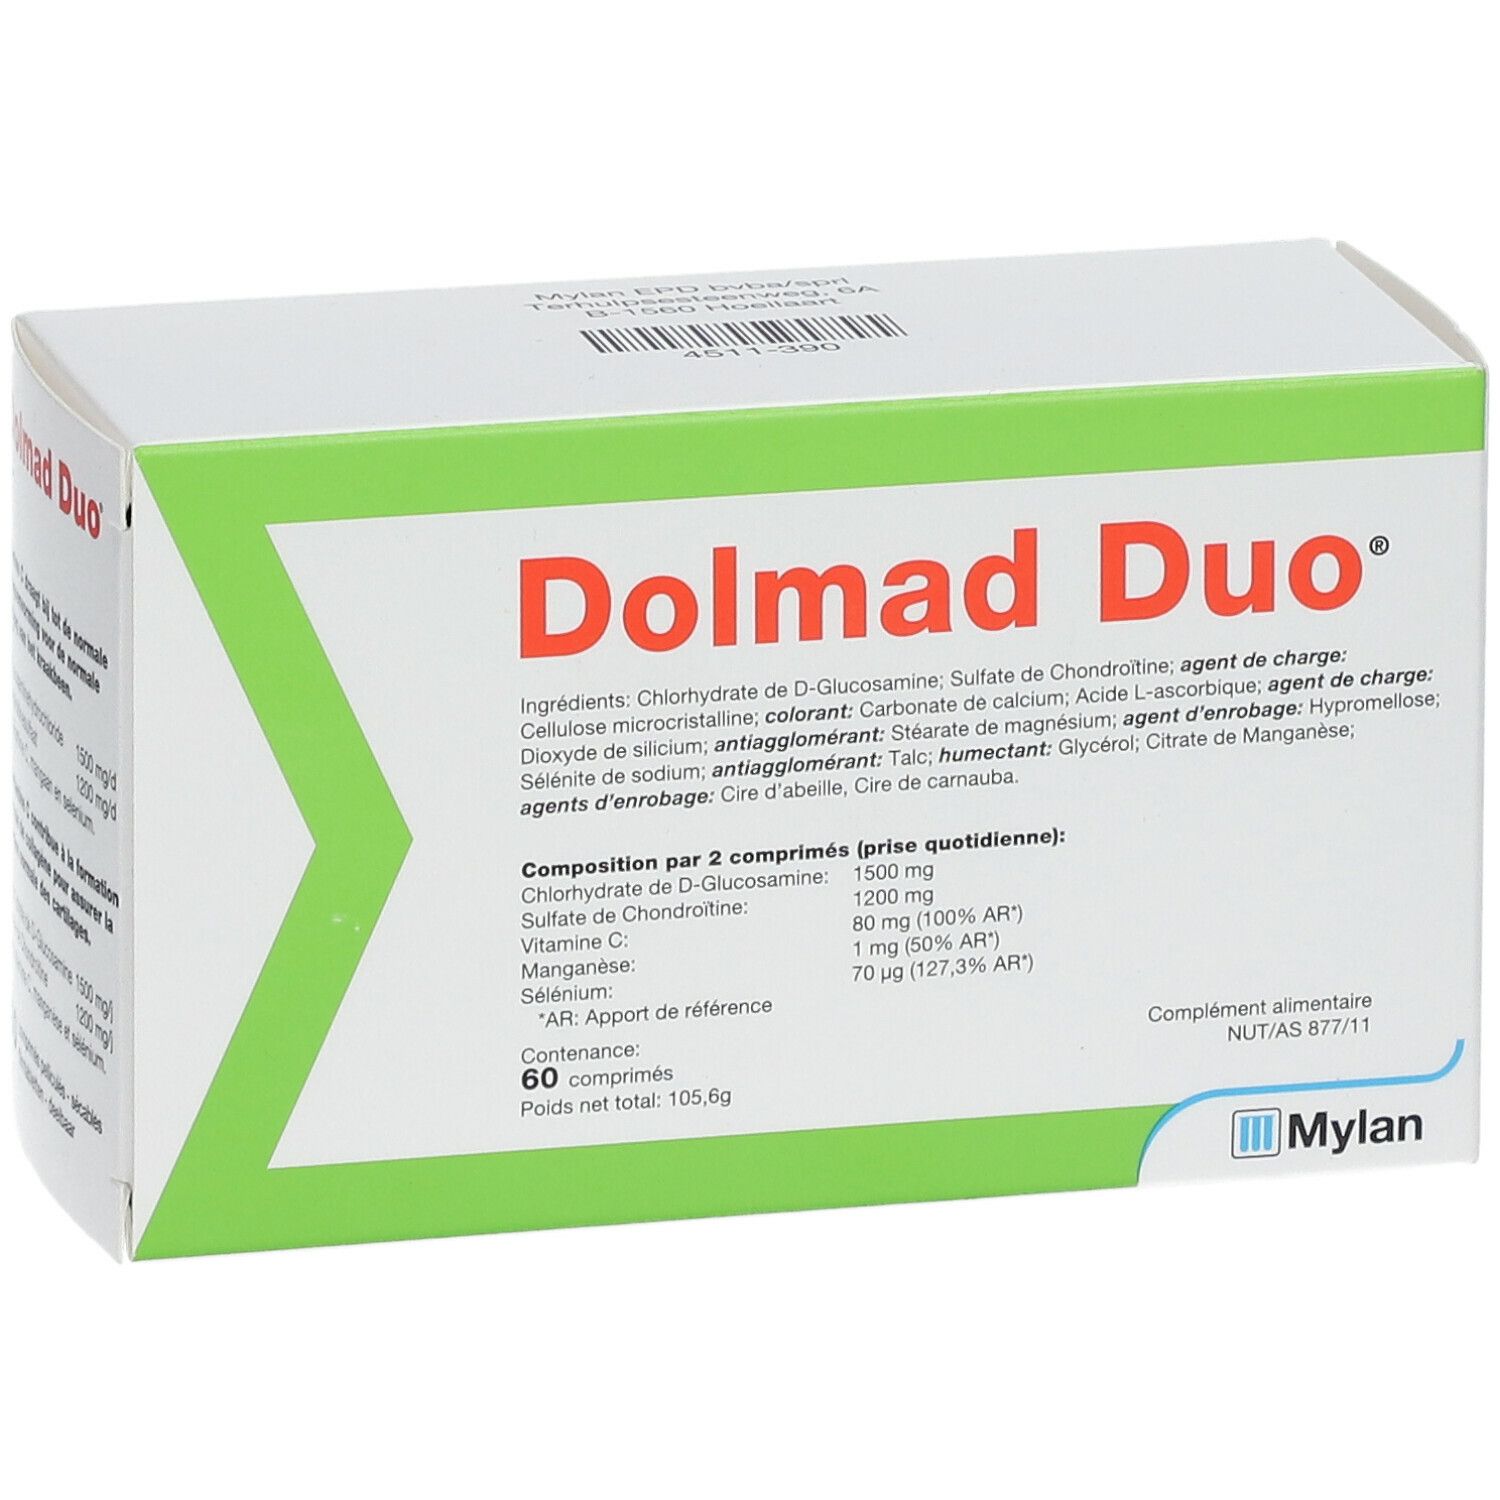 Dolmad Duo